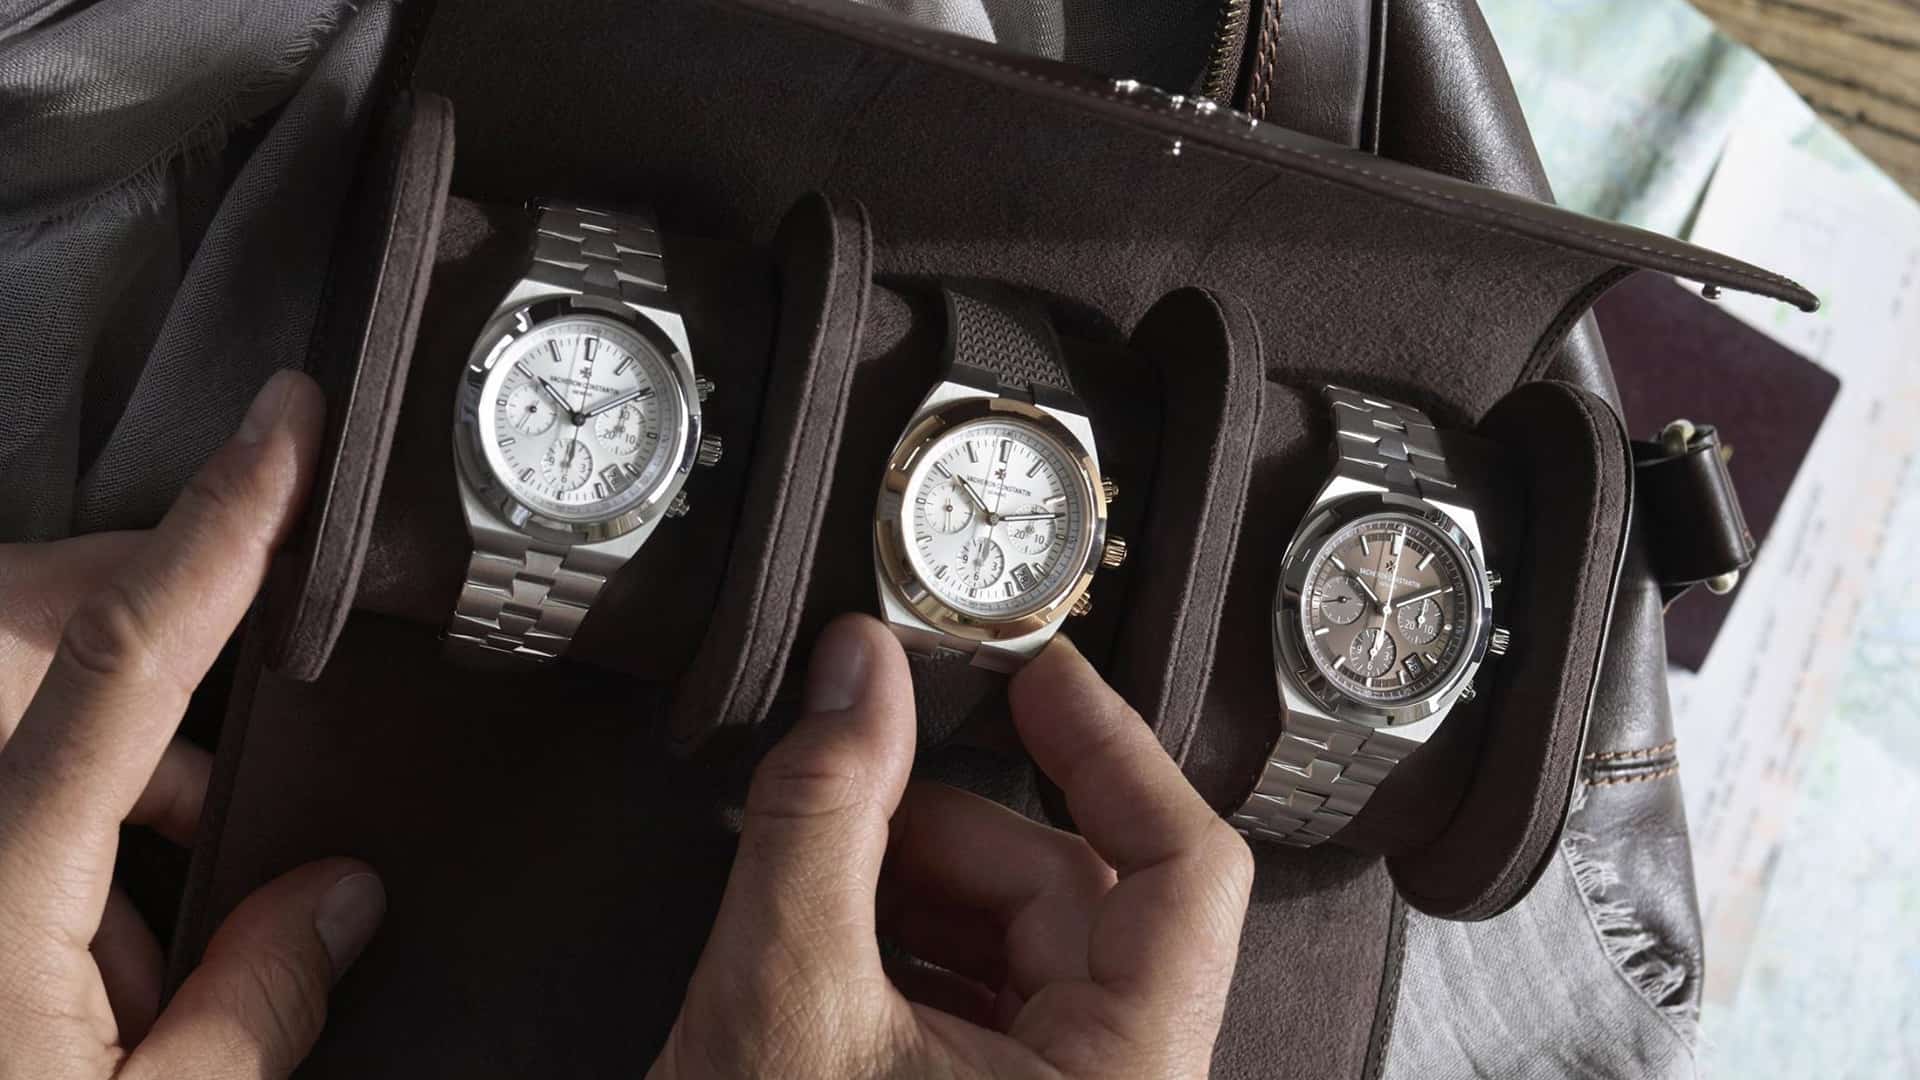 Man with a watch roll with 3 mechanical watches in it